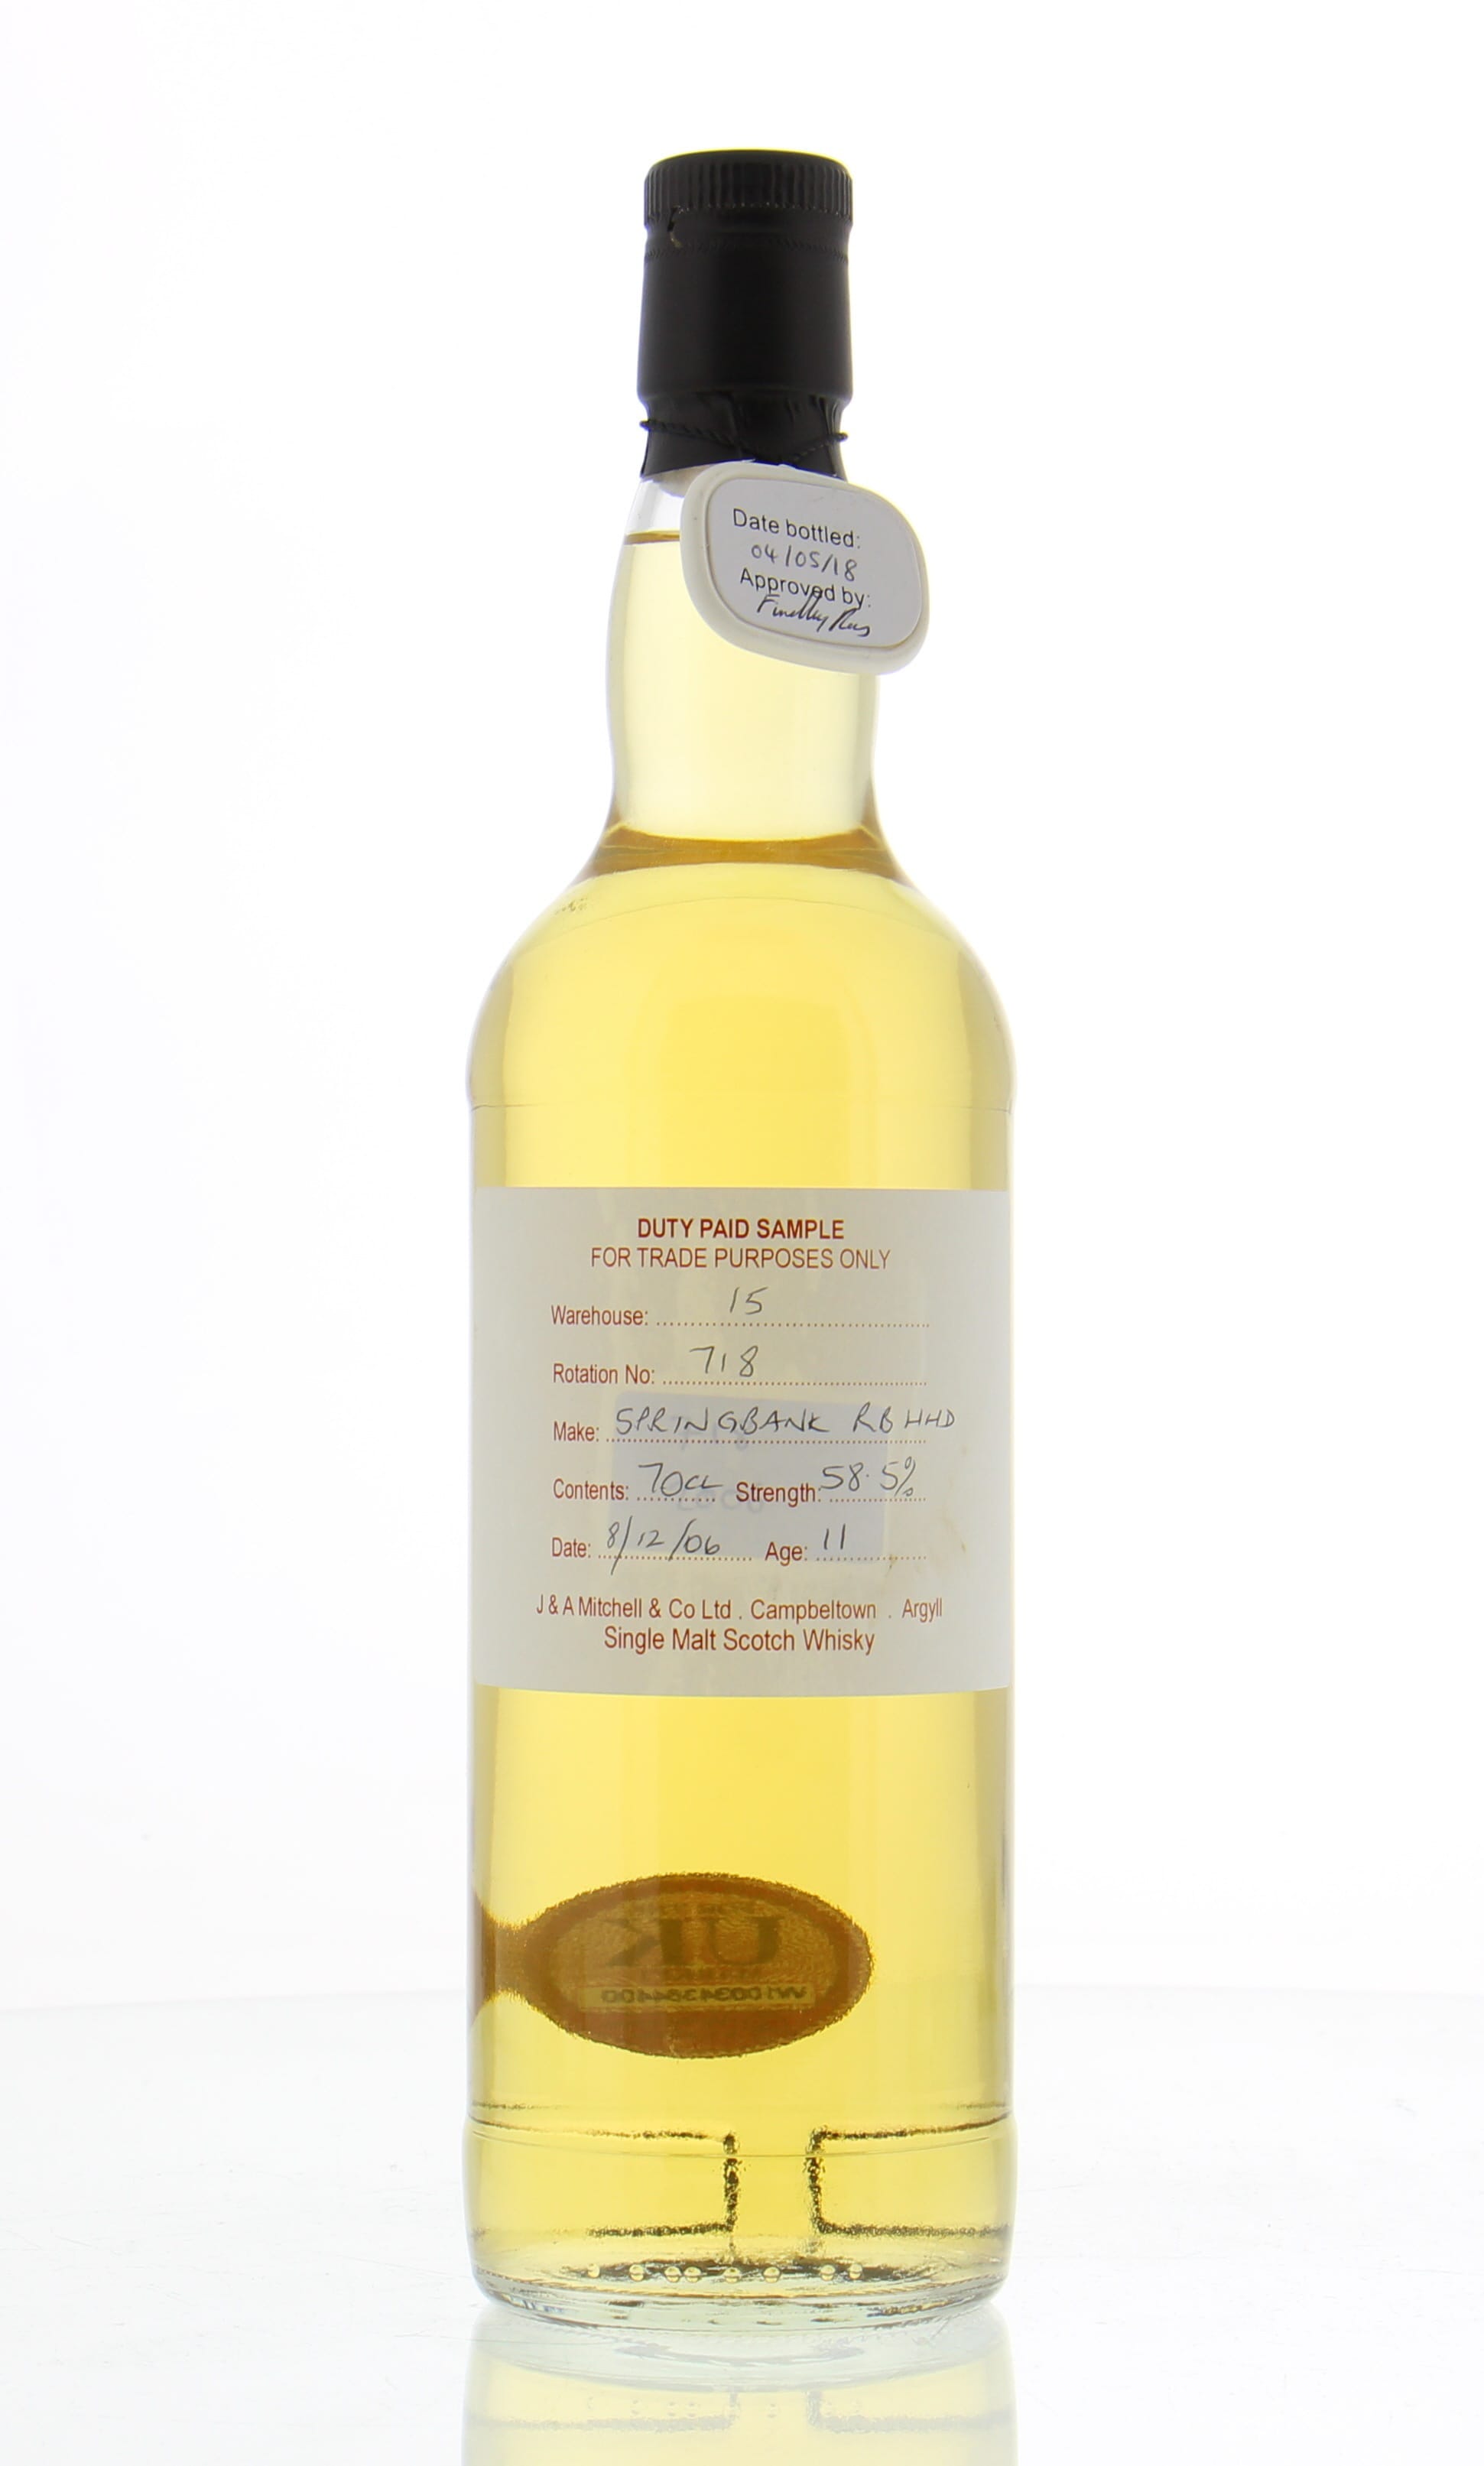 Springbank - 11 Years Old Duty Paid Sample Warehouse 15 Rotation 718 58.5% 2006 Perfect